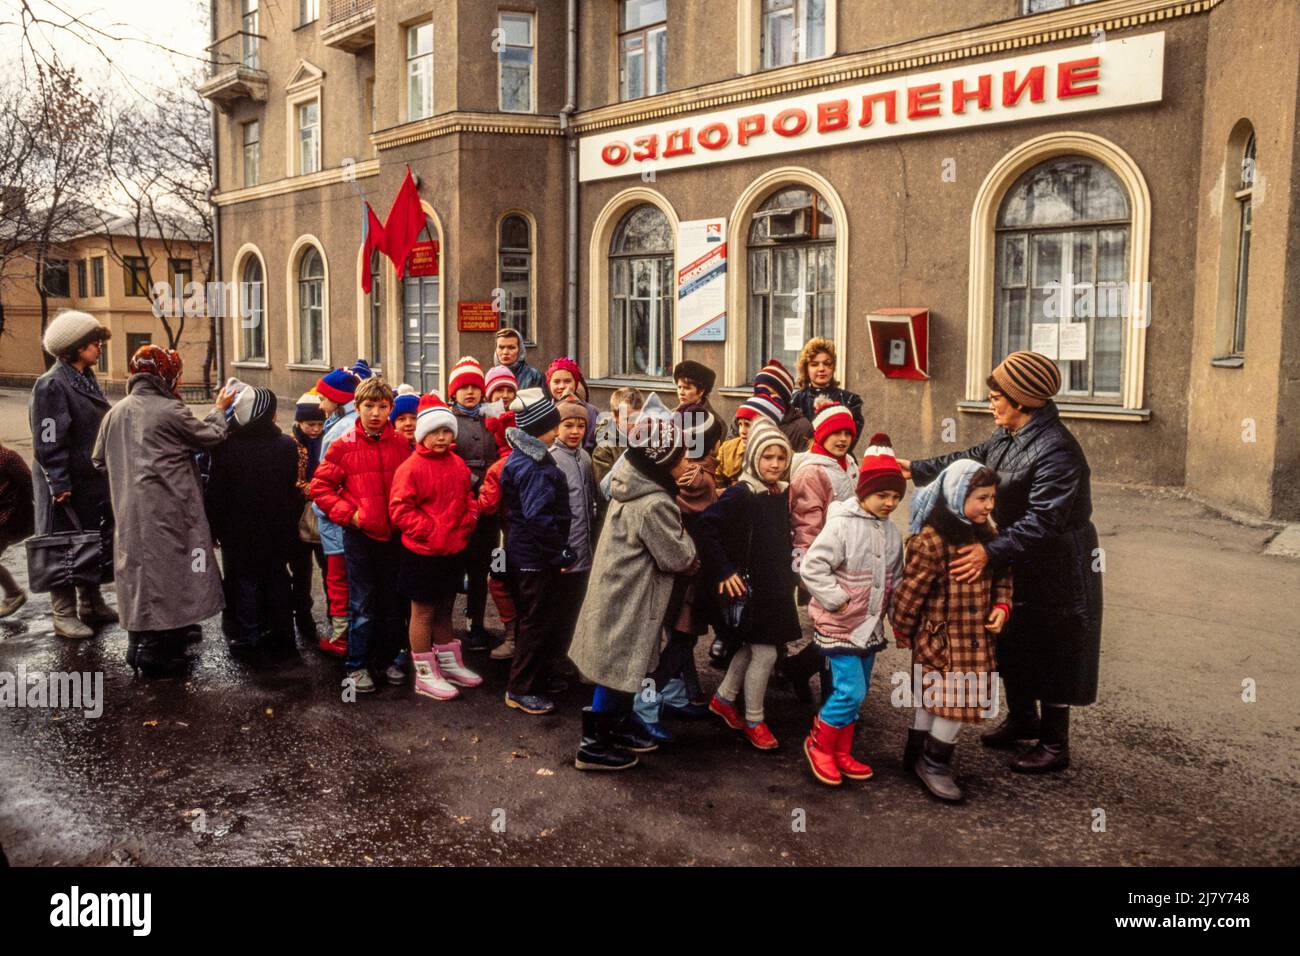 Children being prepared for a school outing, Donbas, Eastern Ukraine Stock Photo